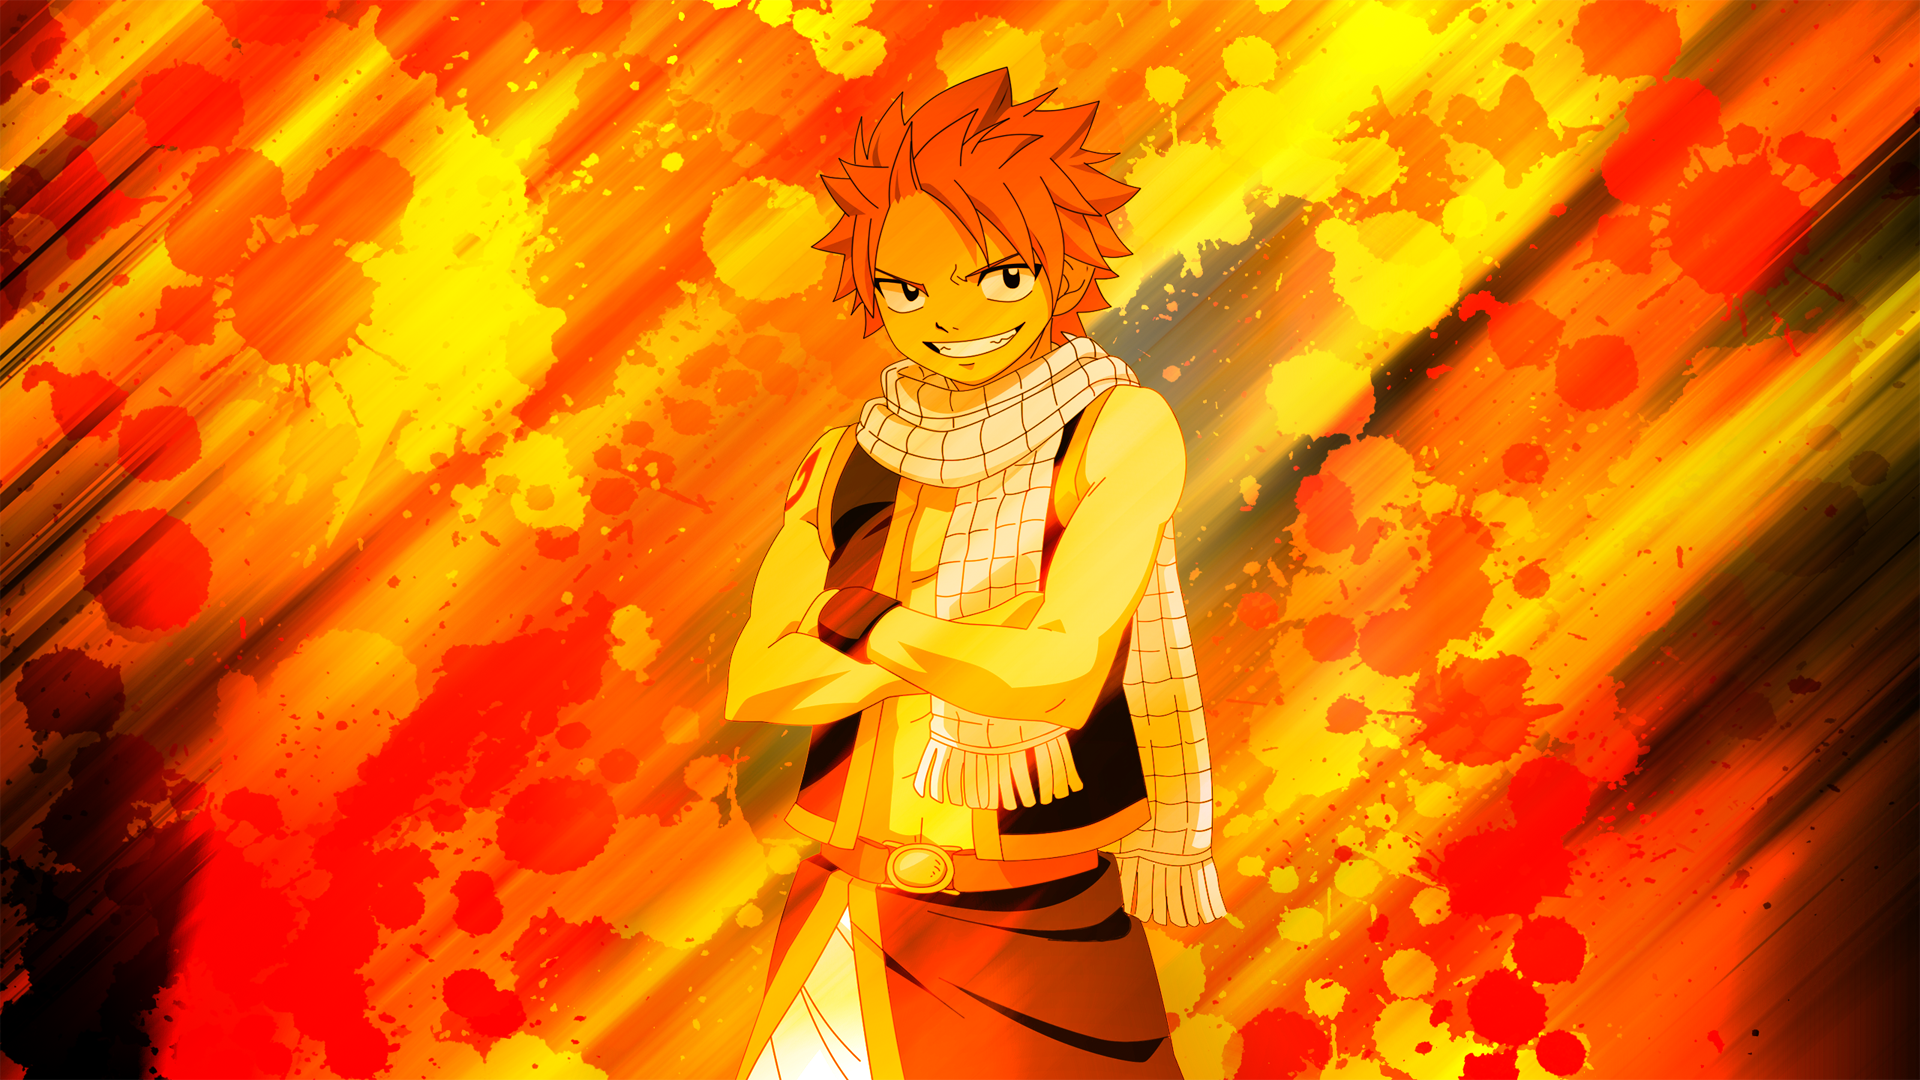 Fairy Tail Natsu Dragonslayer Wallpaper 1080p By Enemyd On